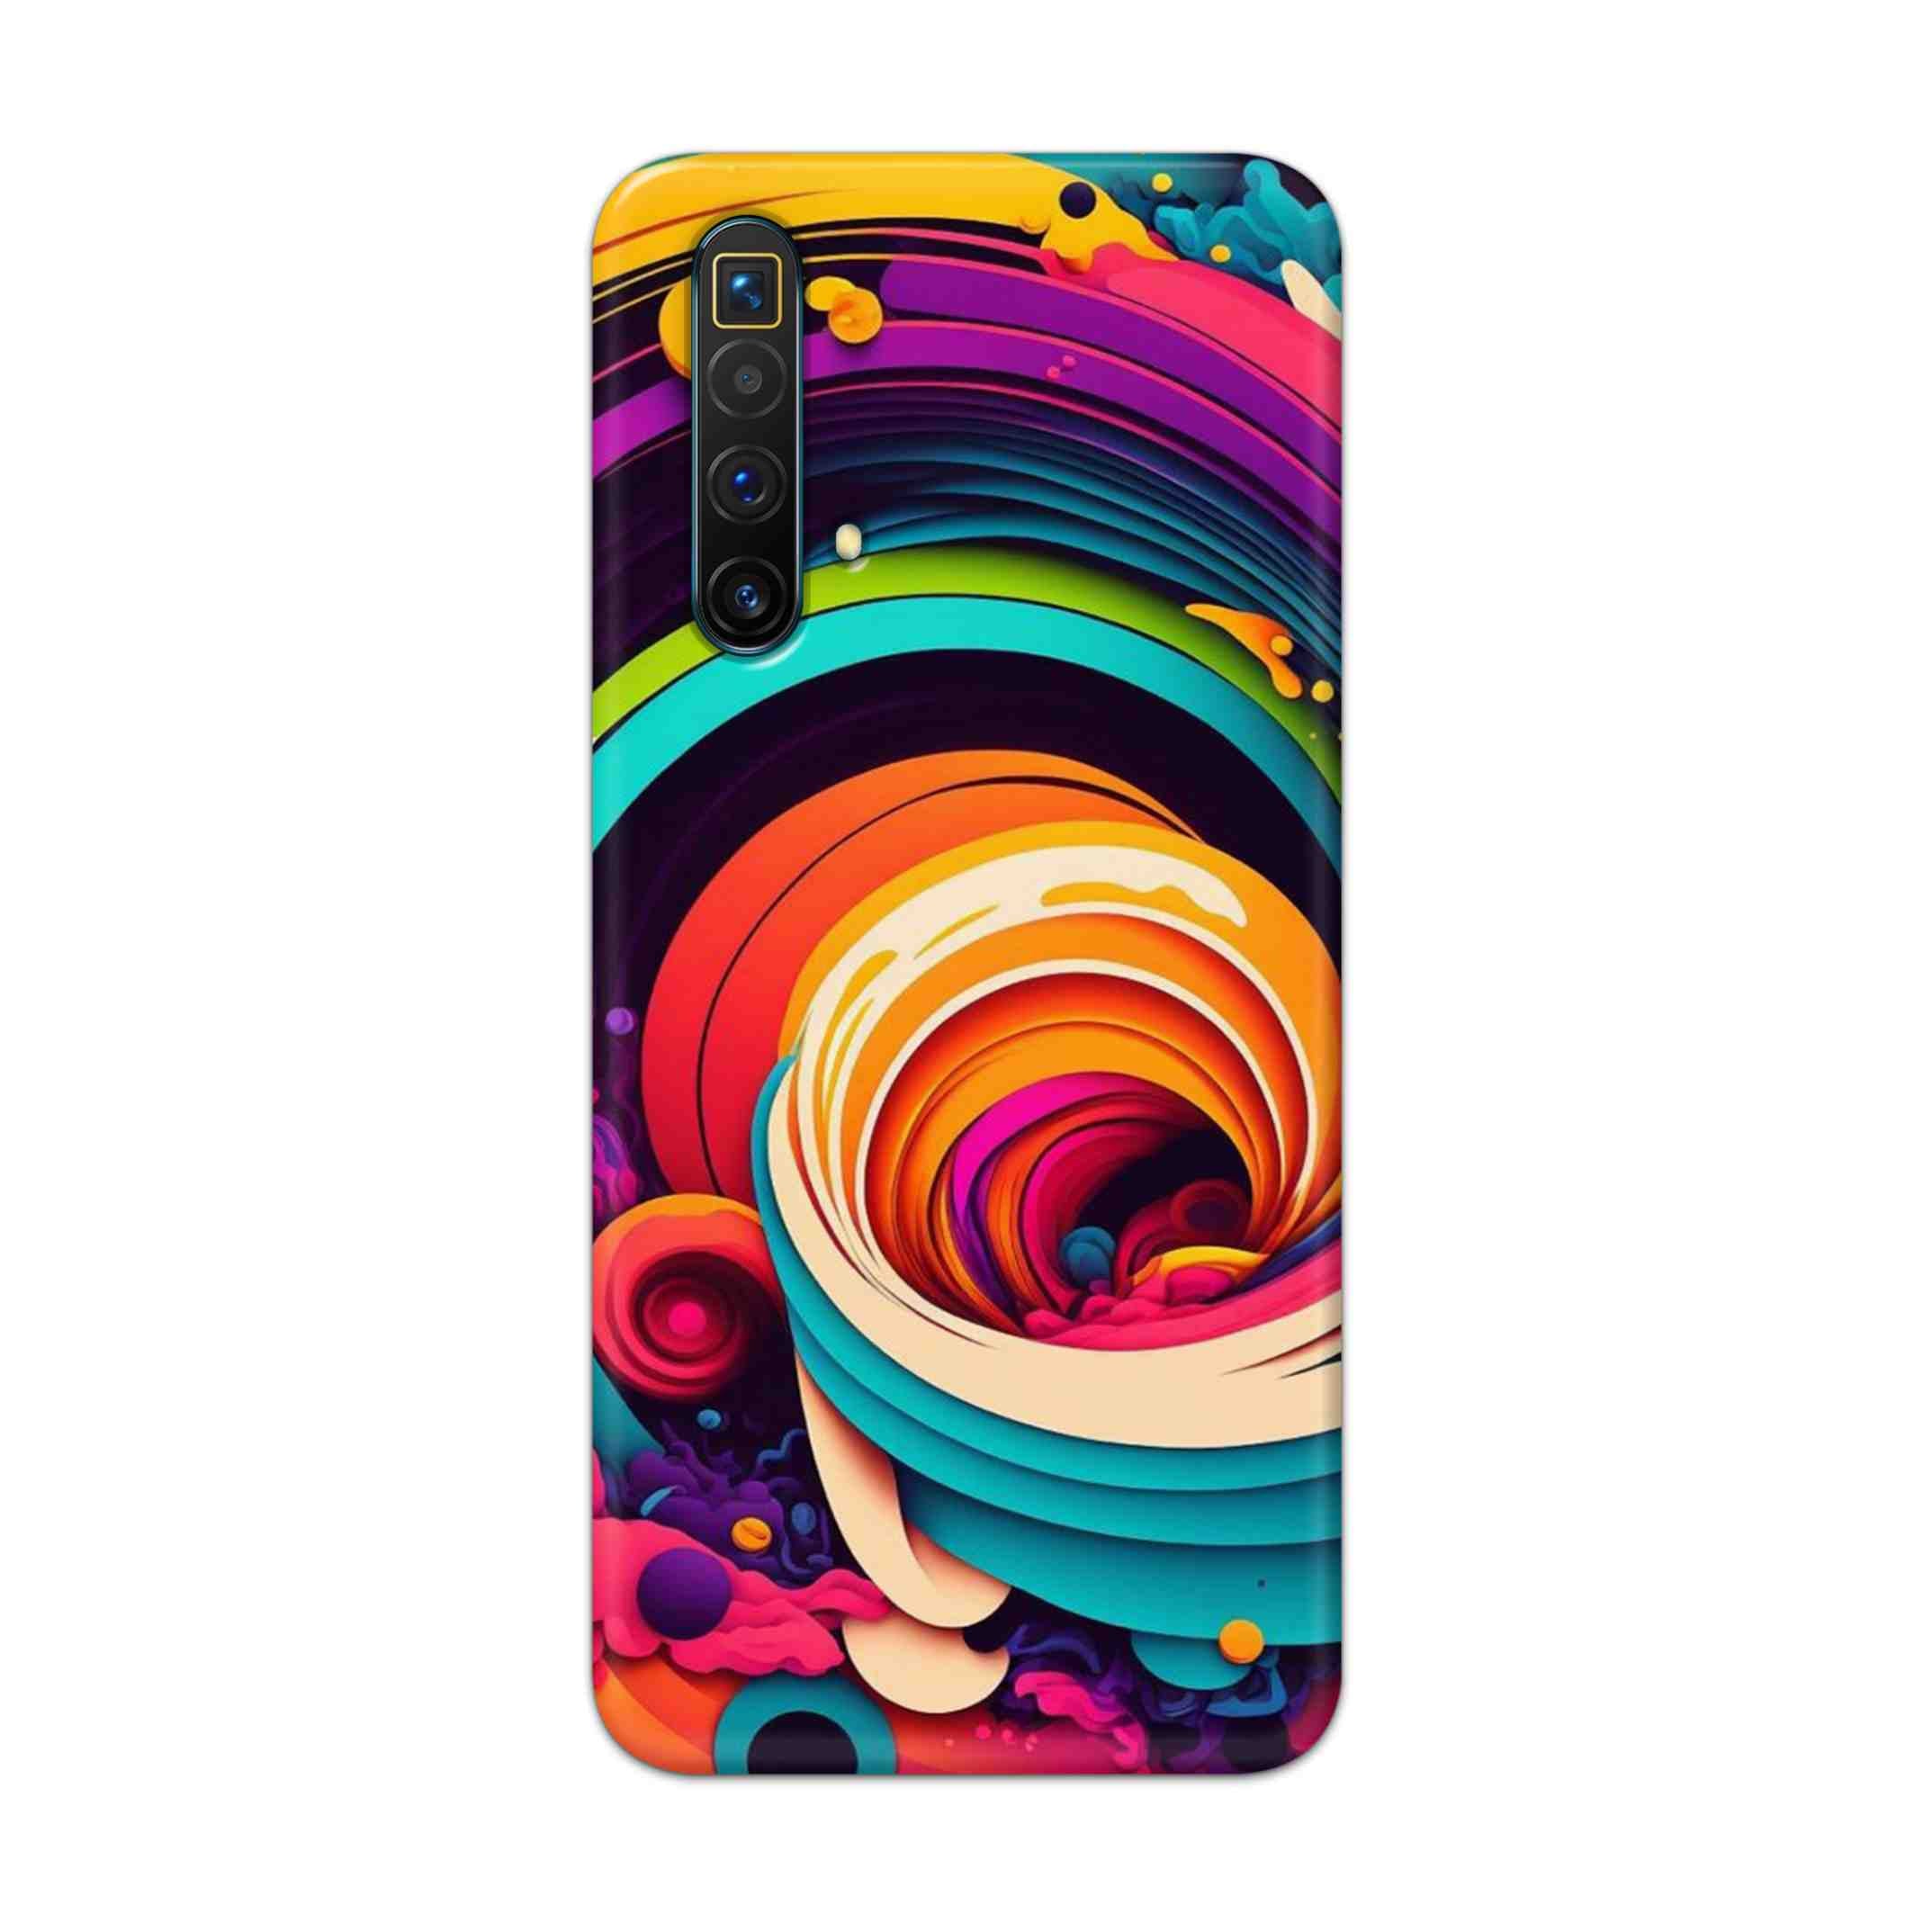 Buy Colour Circle Hard Back Mobile Phone Case Cover For Realme X3 Superzoom Online